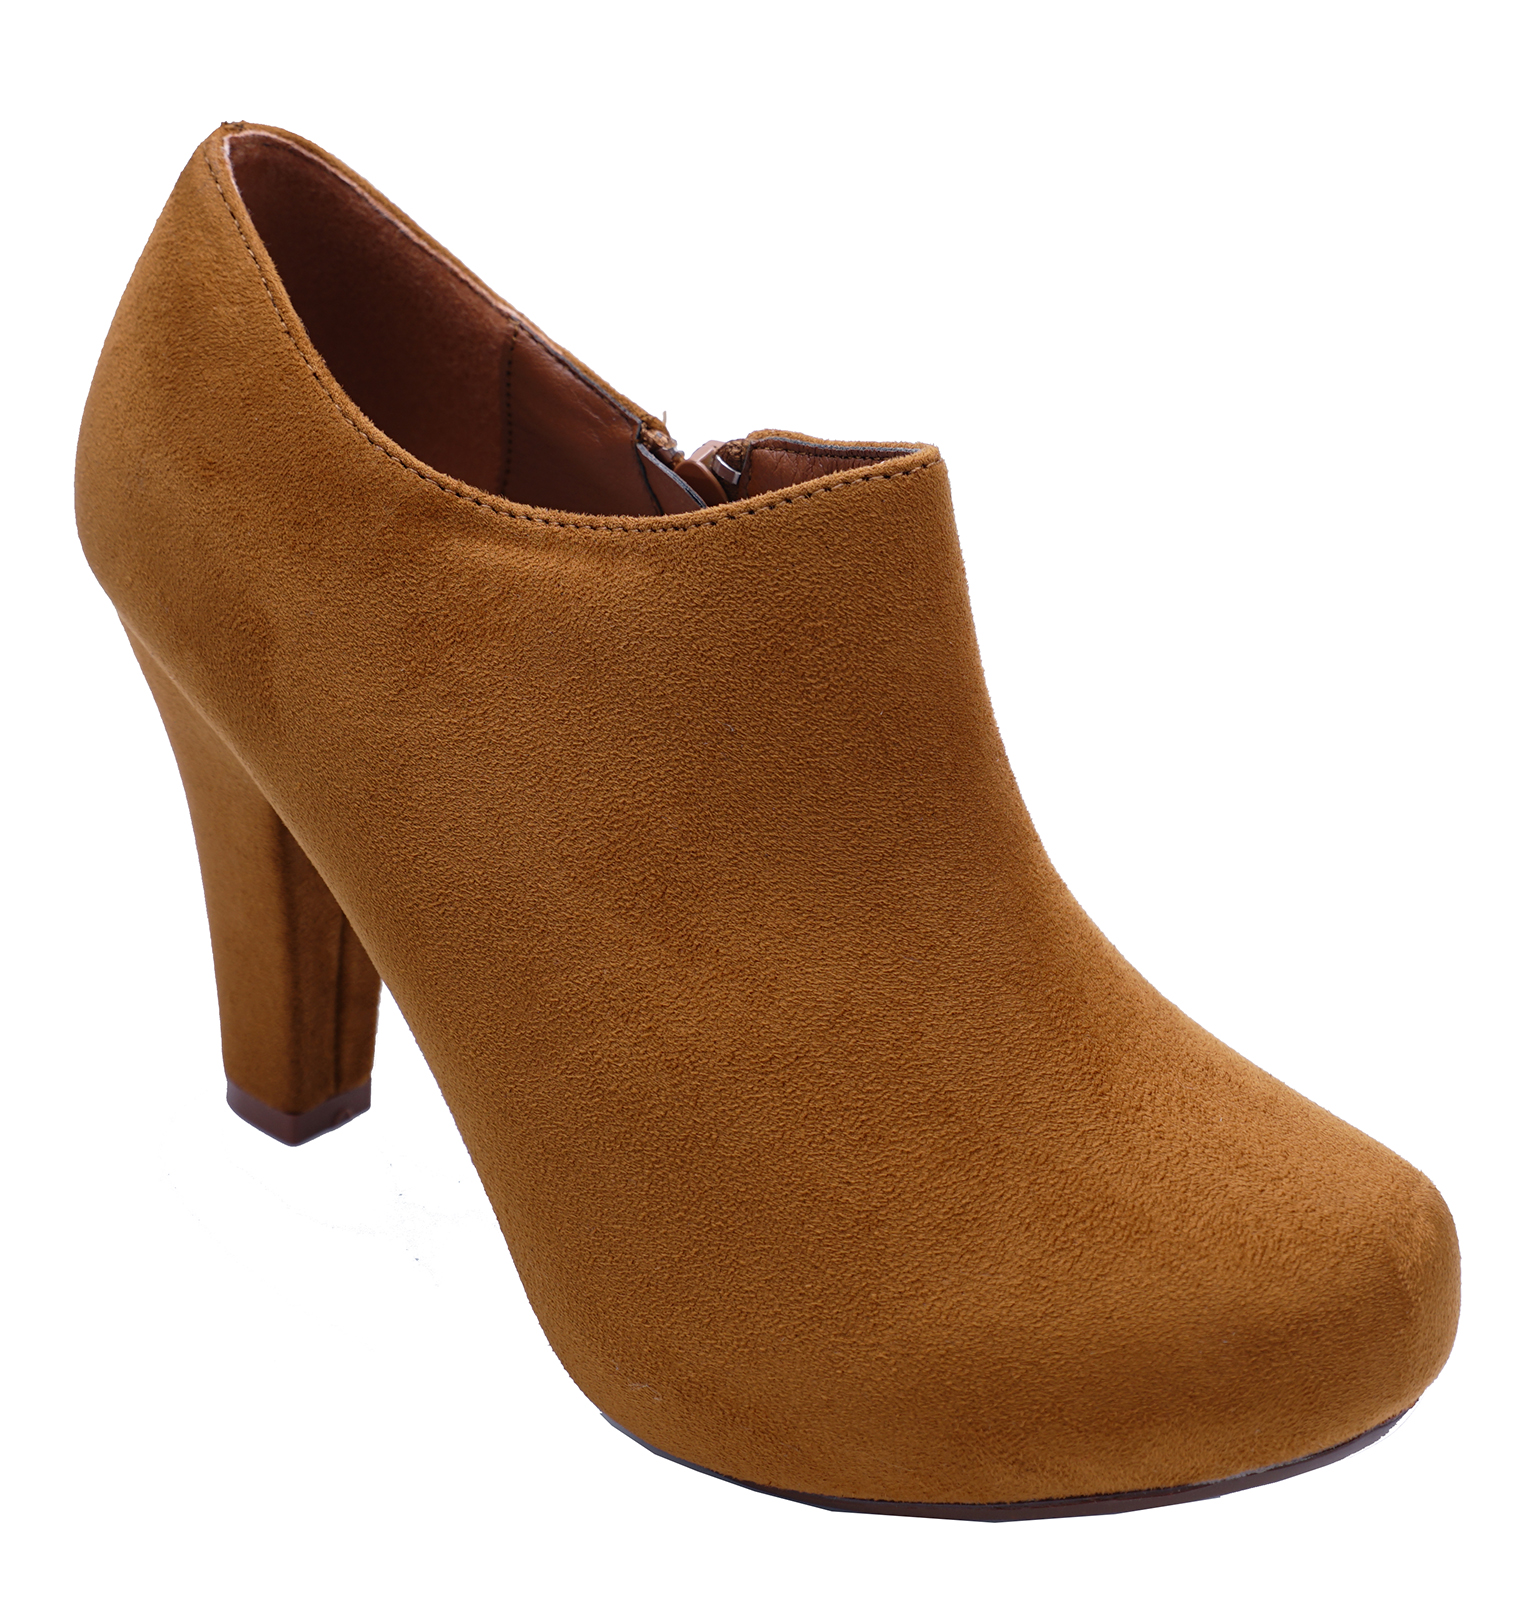 LADIES TAN ZIP-UP SMART CASUAL WORK COMFY CHELSEA ANKLE BOOTS SHOES ...